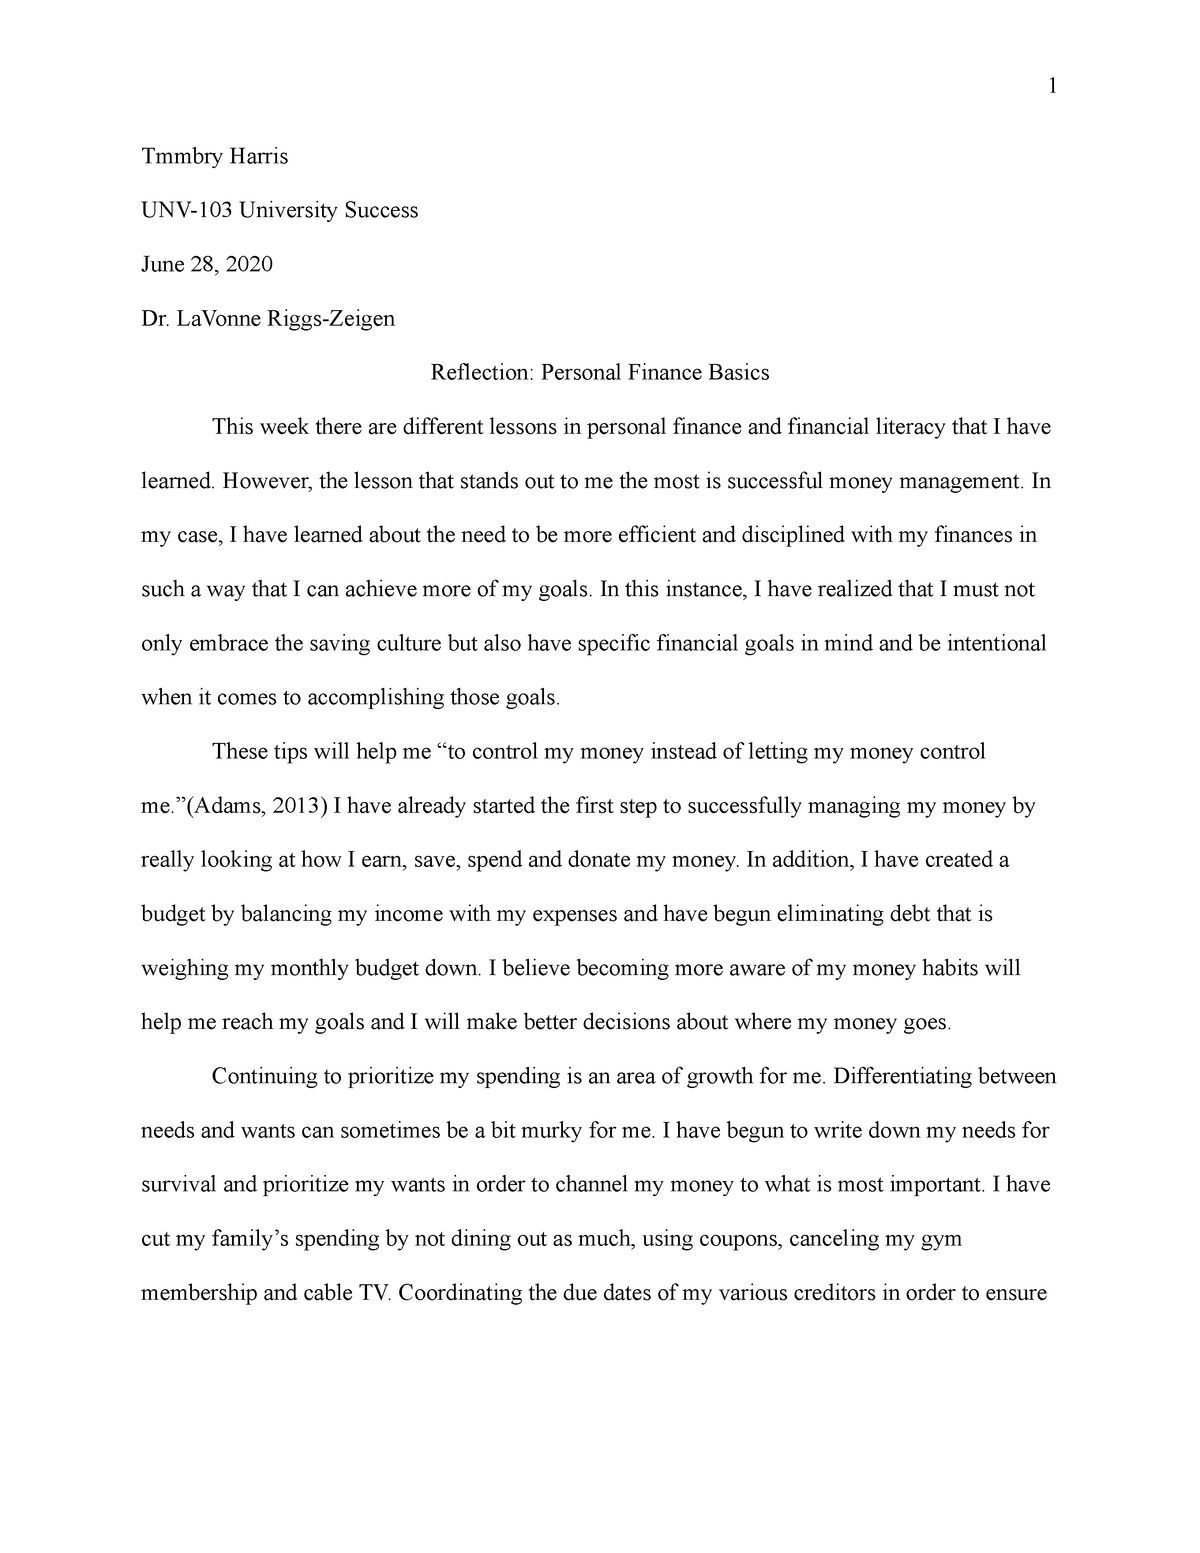 personal finance reflection essay